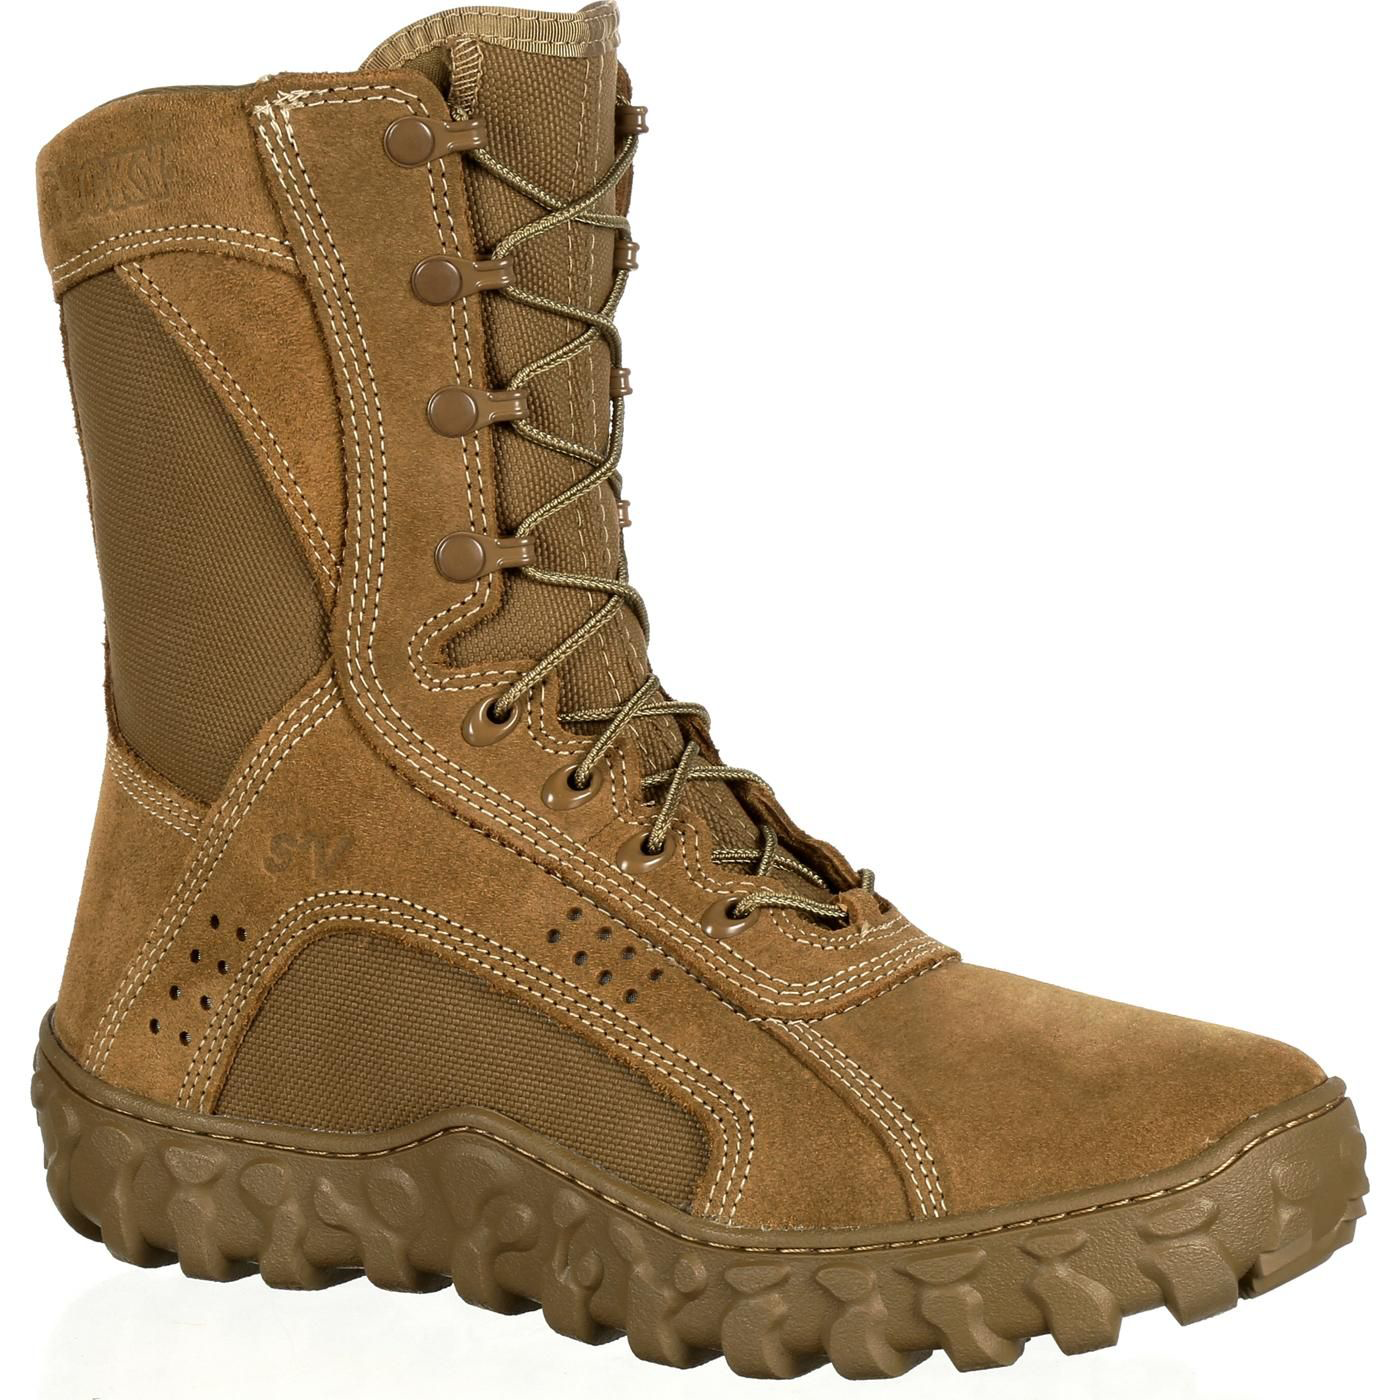 Rocky S2V Tactical Military Boots for Men - Coyote Brown - 3M